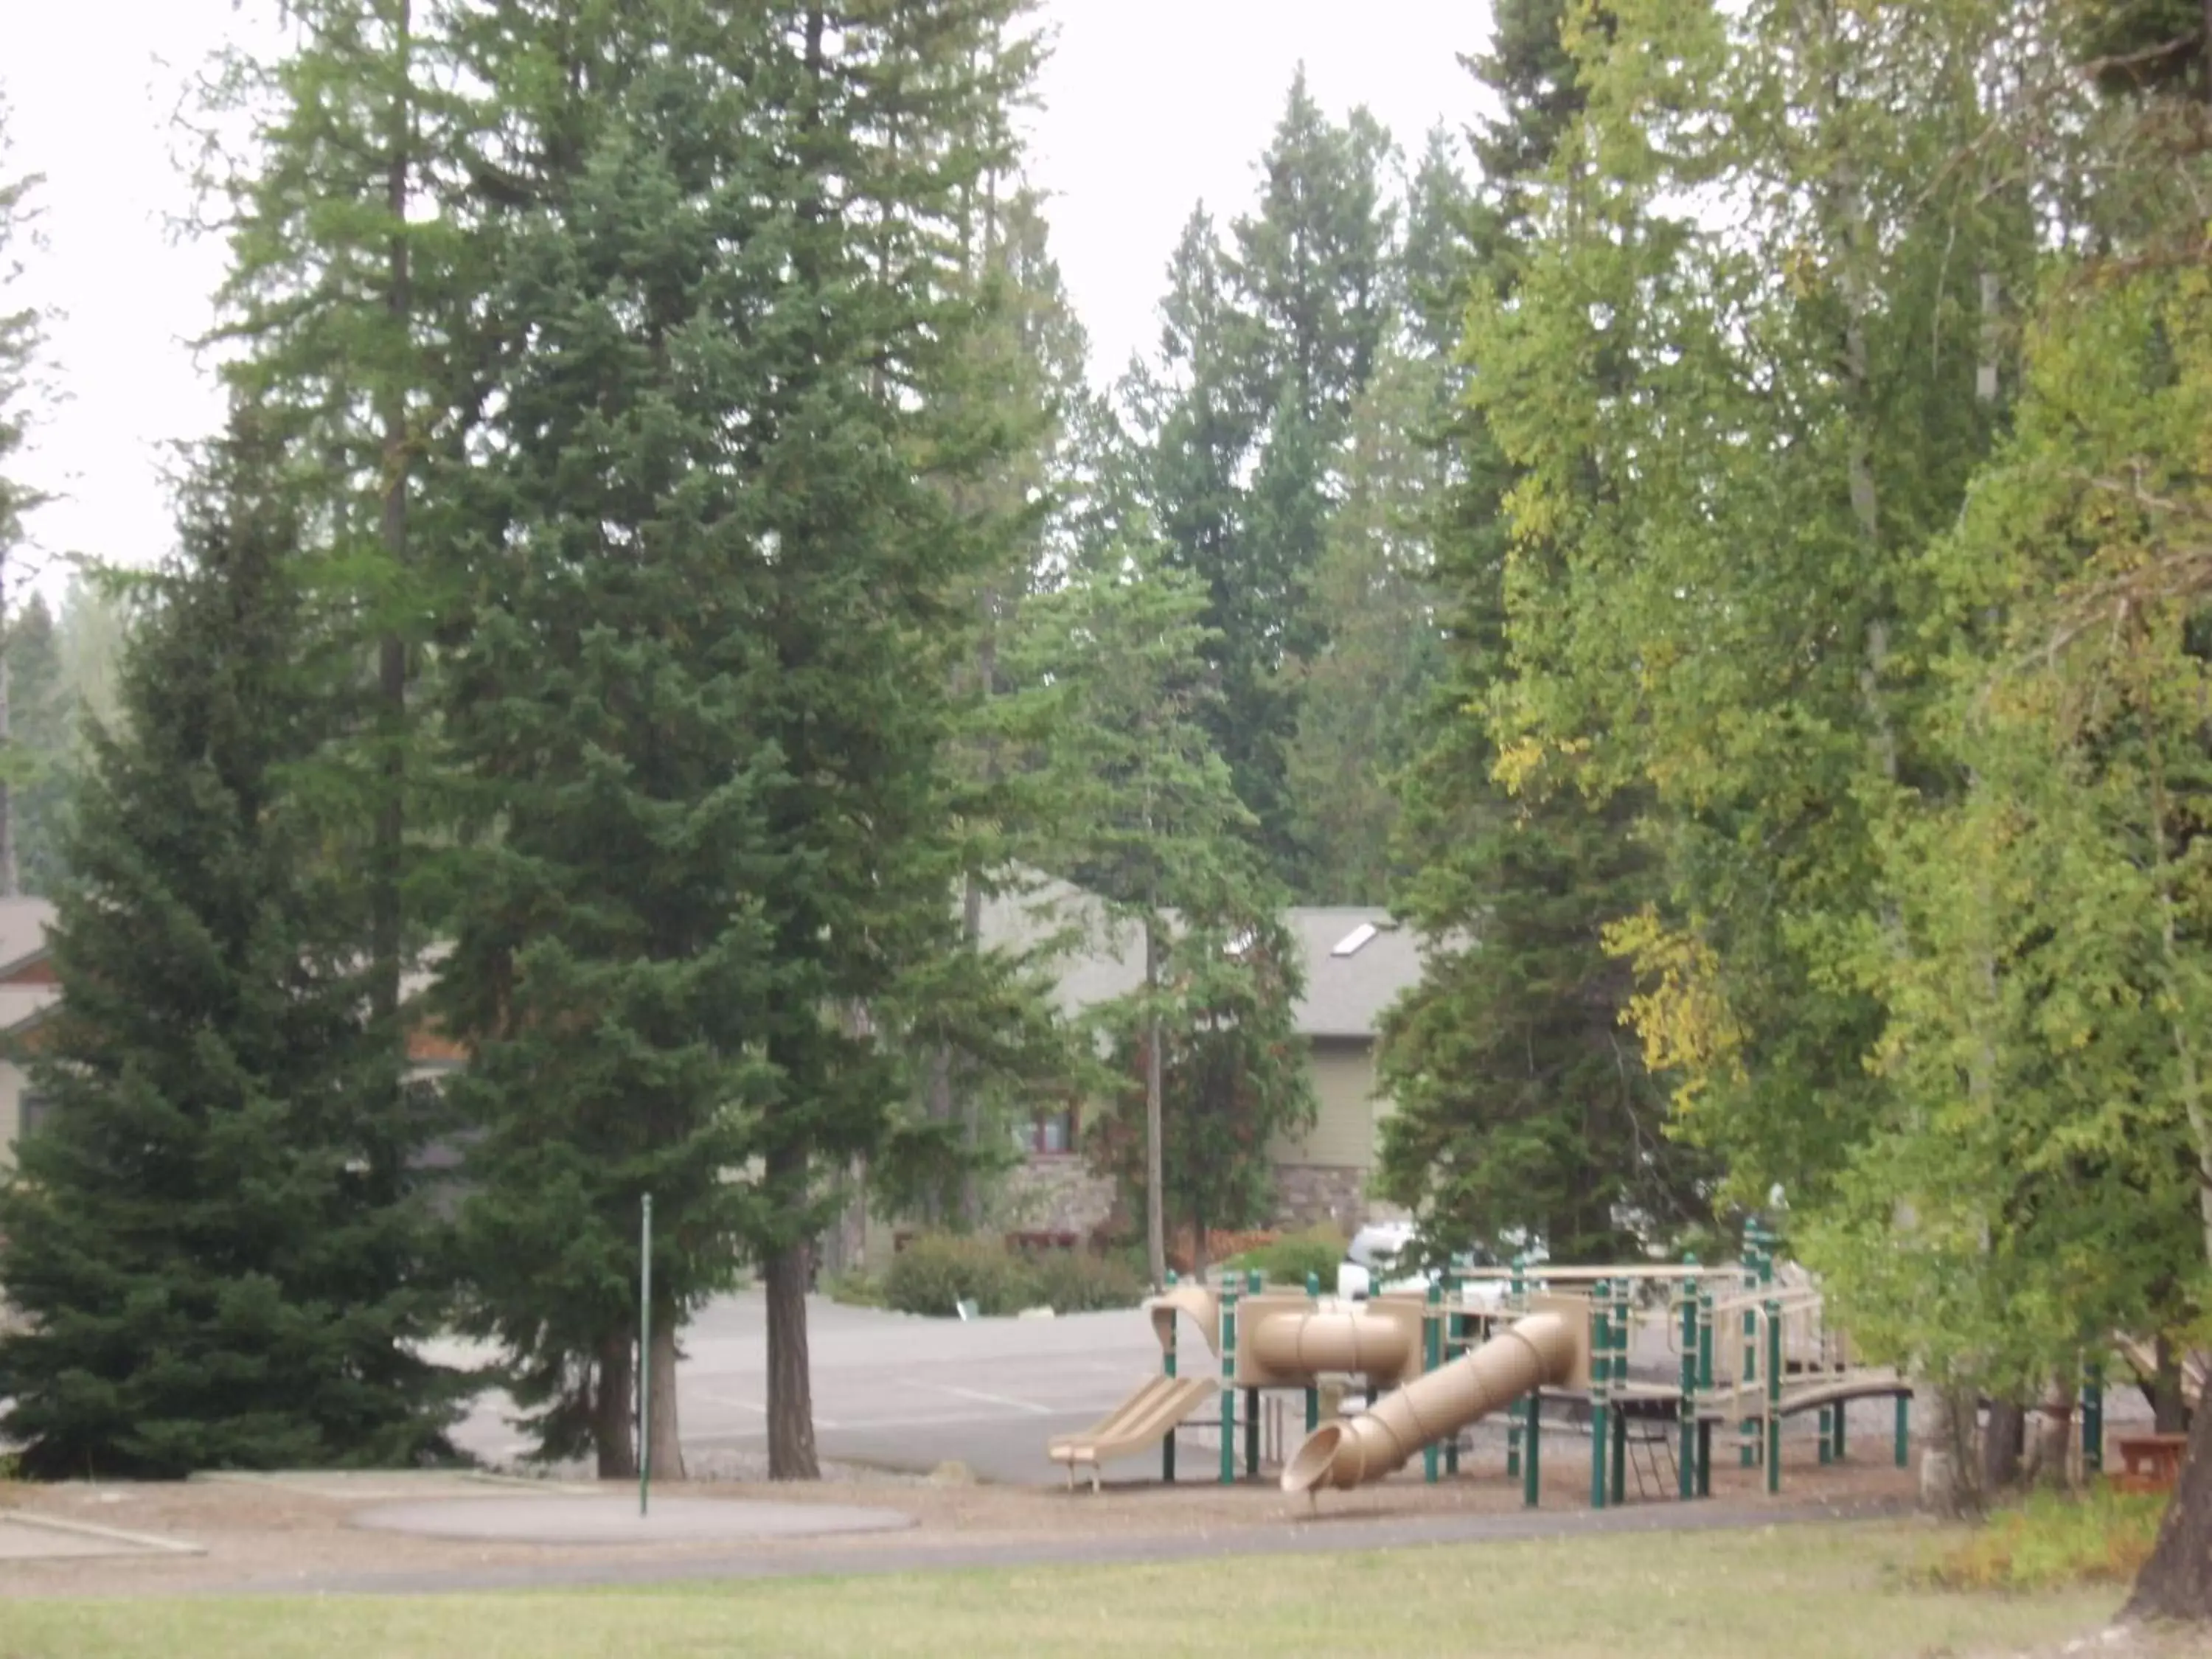 Children play ground in Meadow Lake Resort & Condos